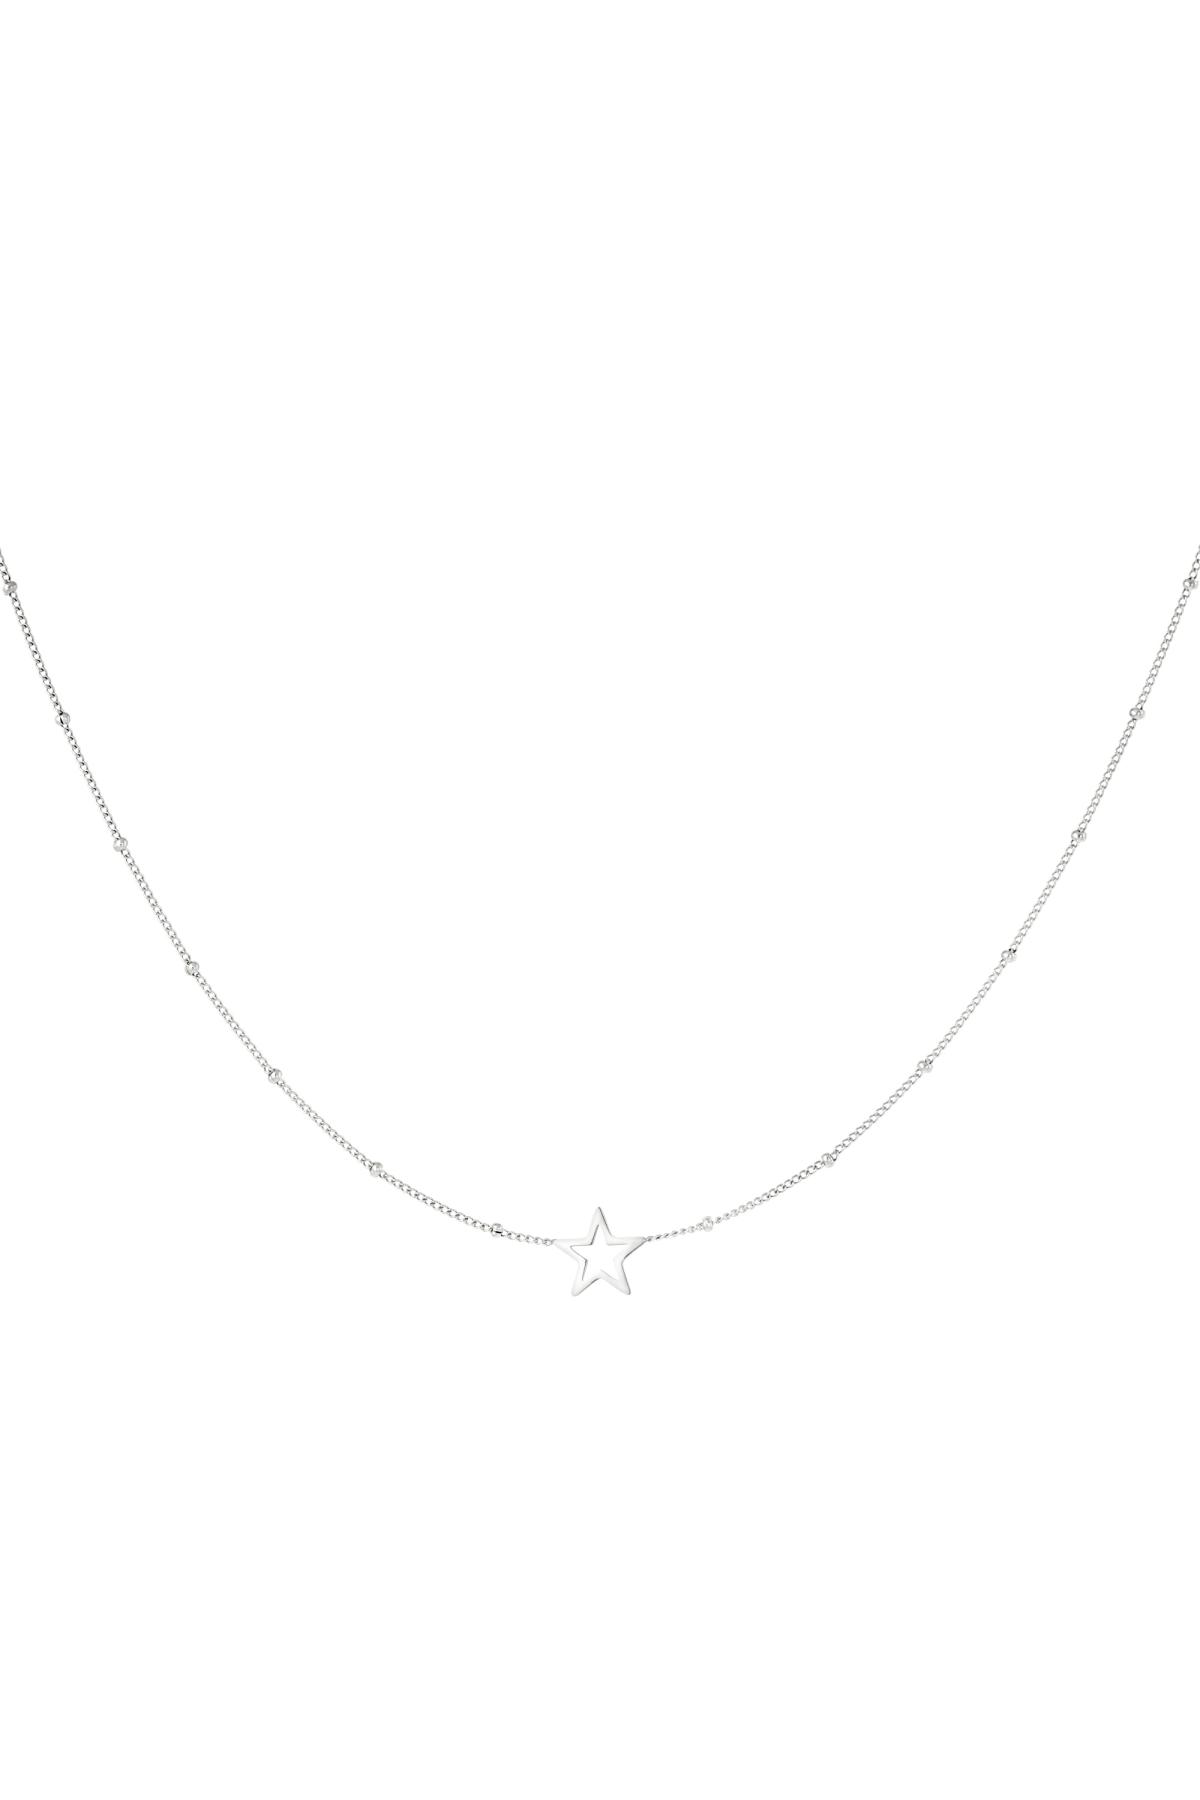 Minimalistic necklace open star Silver Stainless Steel h5 